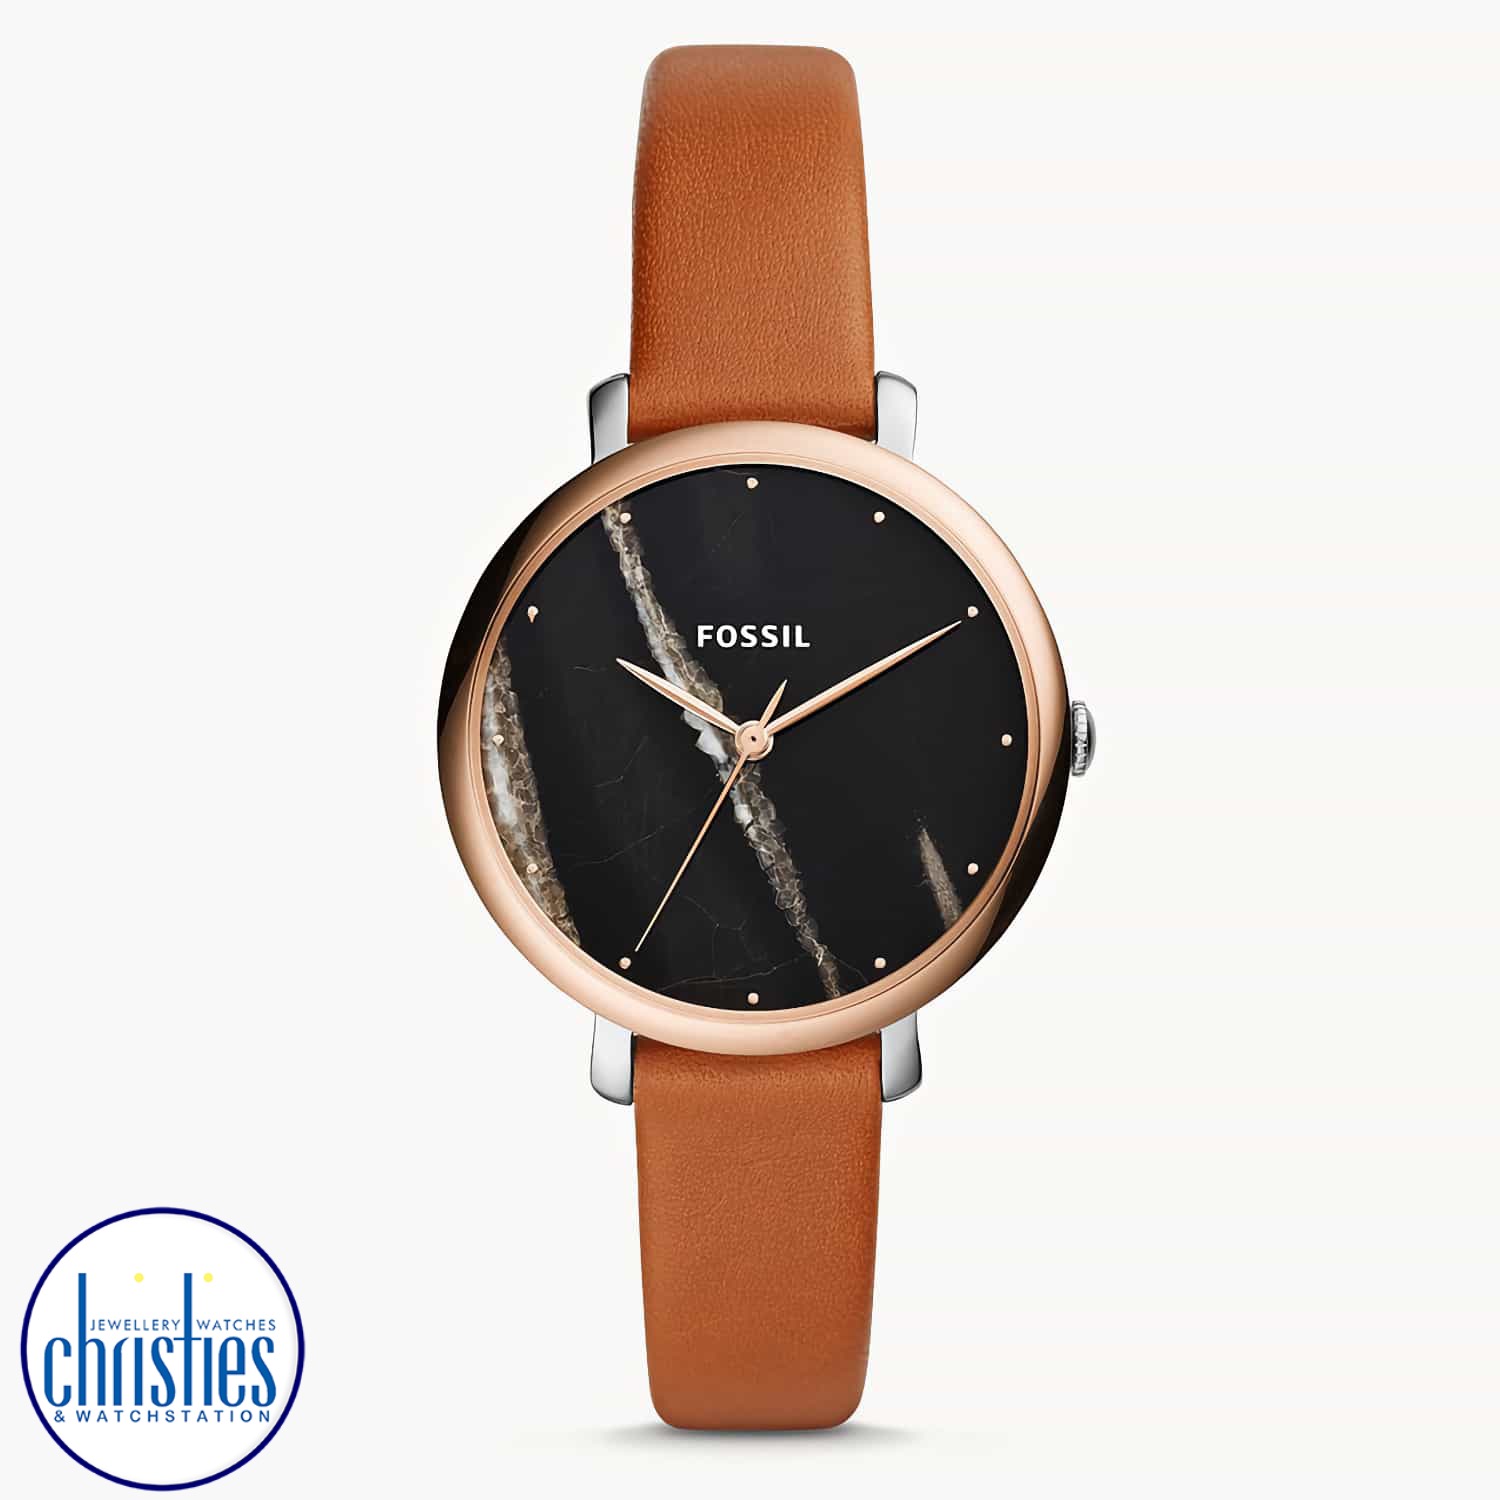 ES4378 Fossil Jacqueline Three Hand Luggage Leather Watch. ES4378 Fossil Jacqueline Three Hand Luggage Leather Watch Afterpay - Split your purchase into 4 instalments - Pay for your purchase over 4 instalments, due every two weeks. You’ll pay your first i